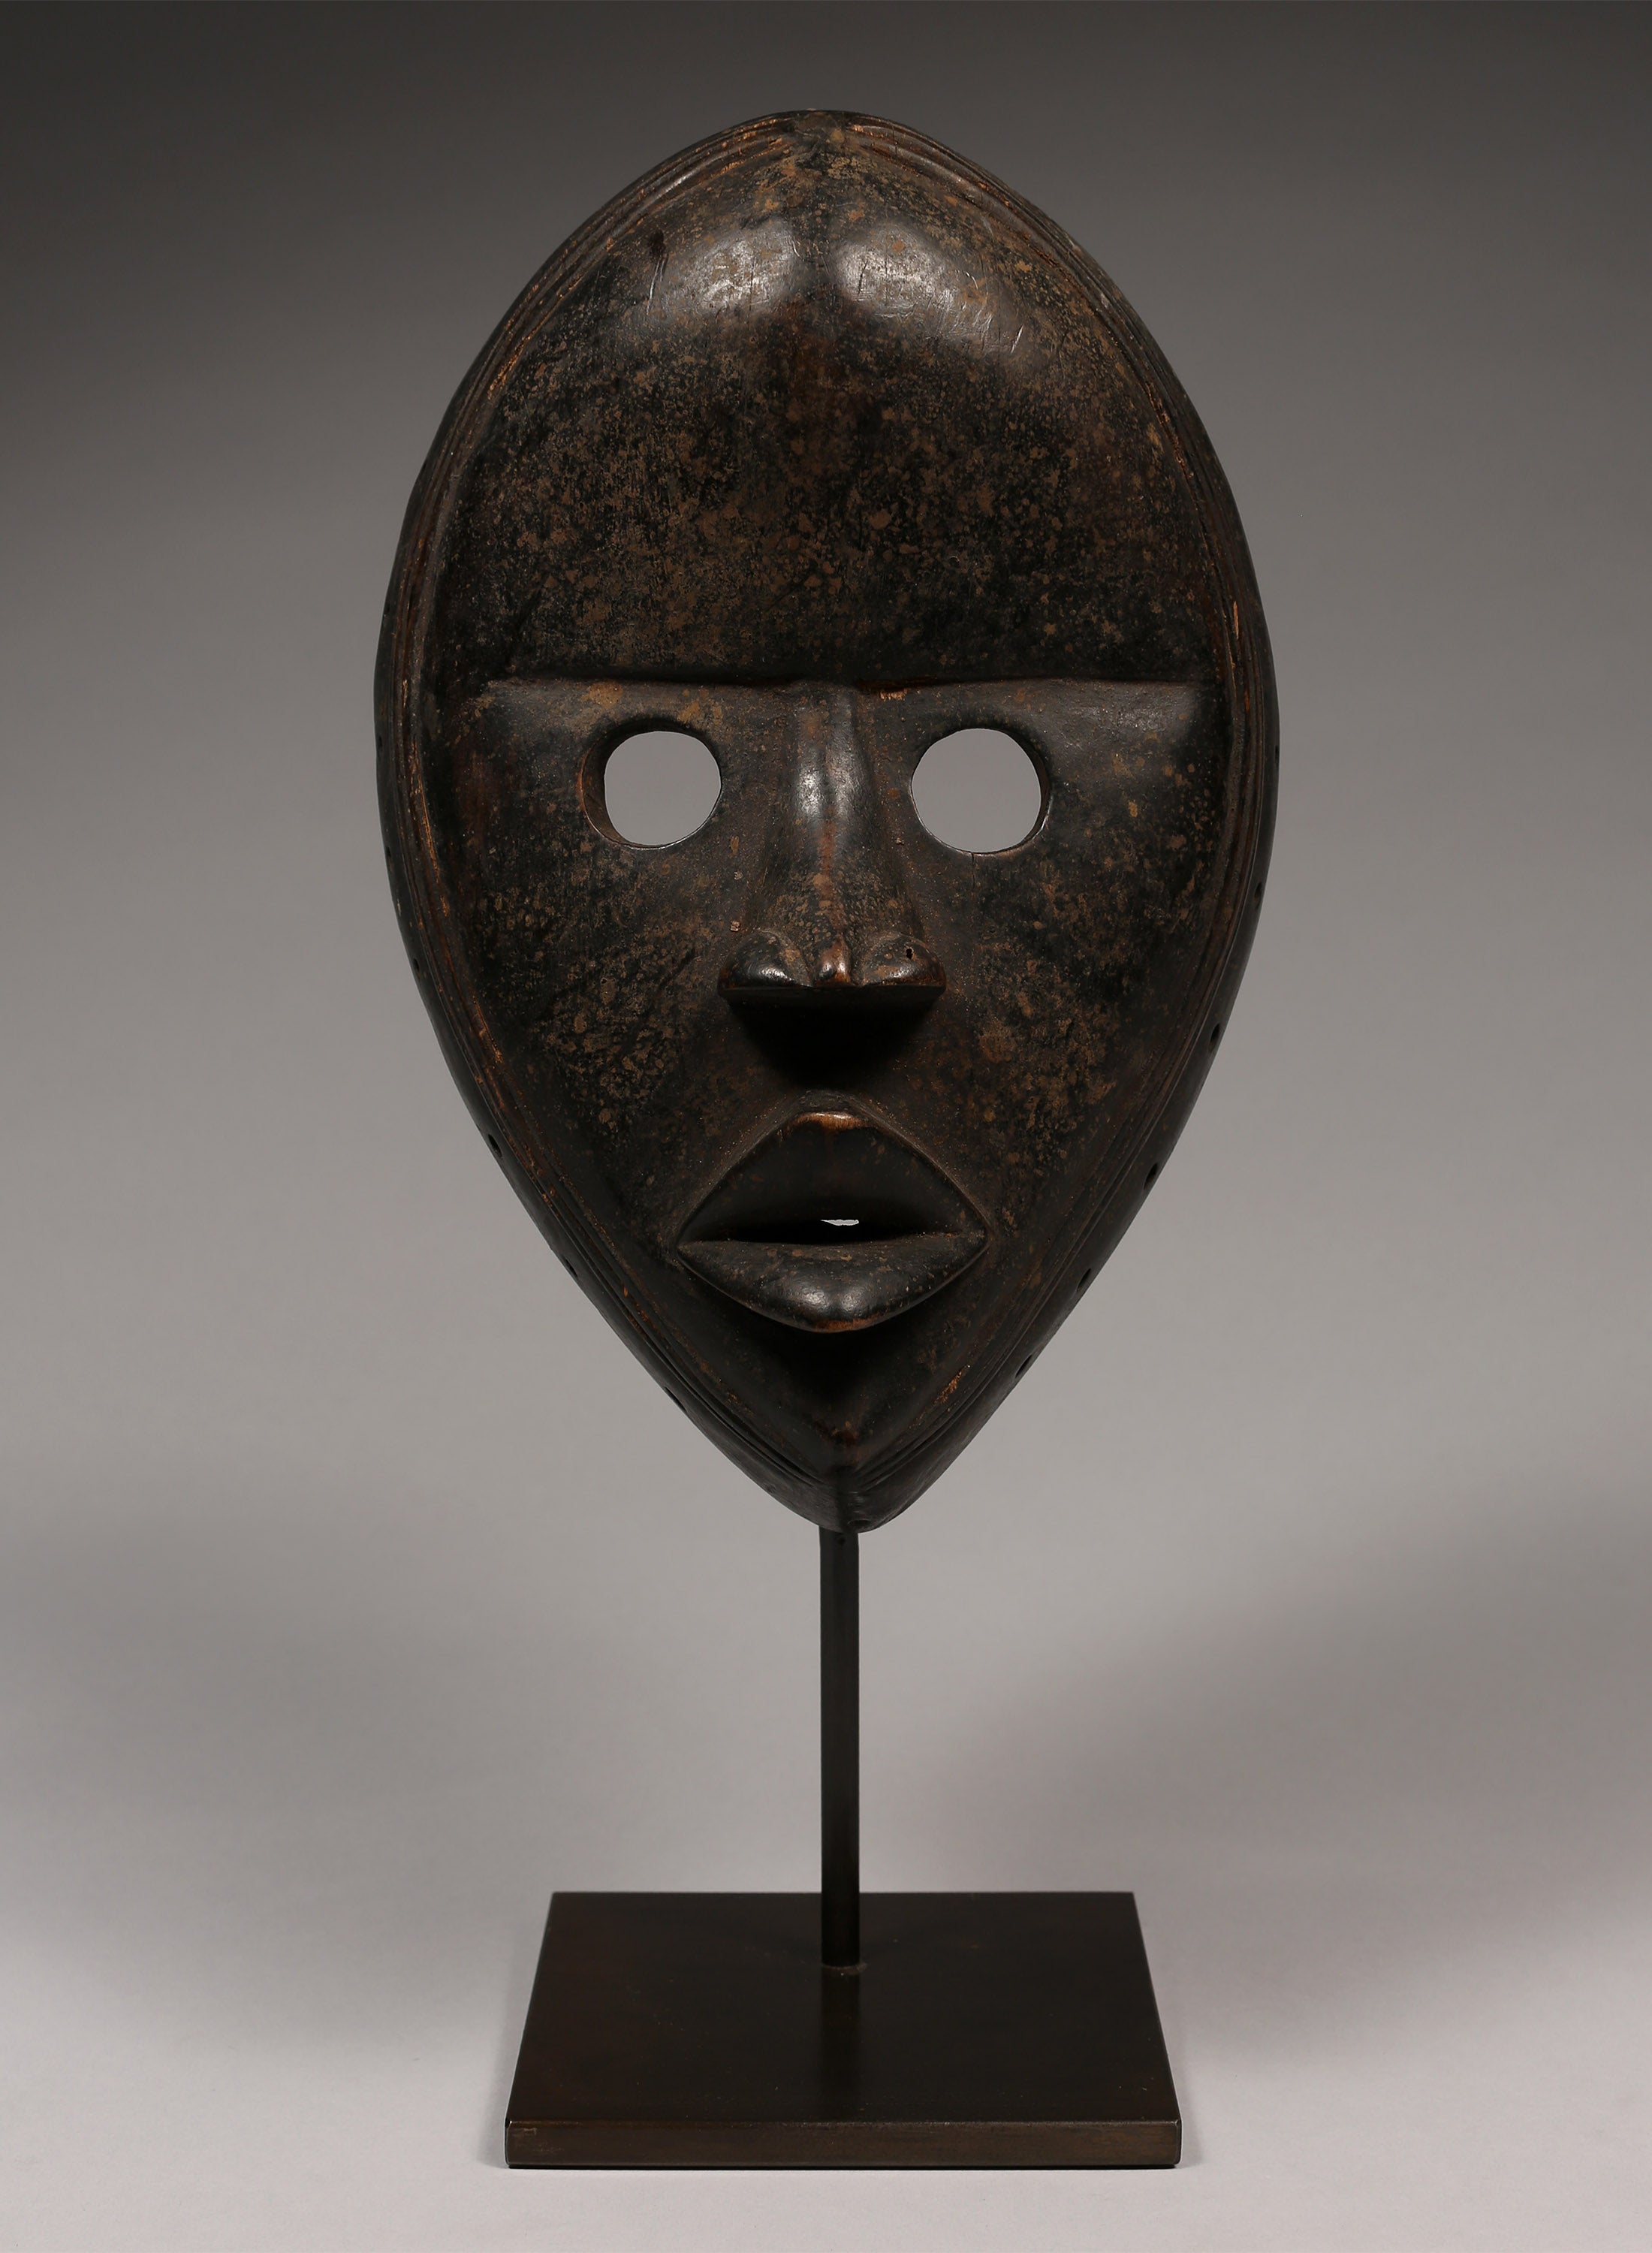 Tribal Masks - Traditional - Folk Art - African - Objects - Artifacts - Sculptures - Collectible - Gunye Ge - Dan Tribe - Wooden Carving - Distinctive Artistry - Culture Heritage Of Africa - Impressive Piece - Intricate Detail